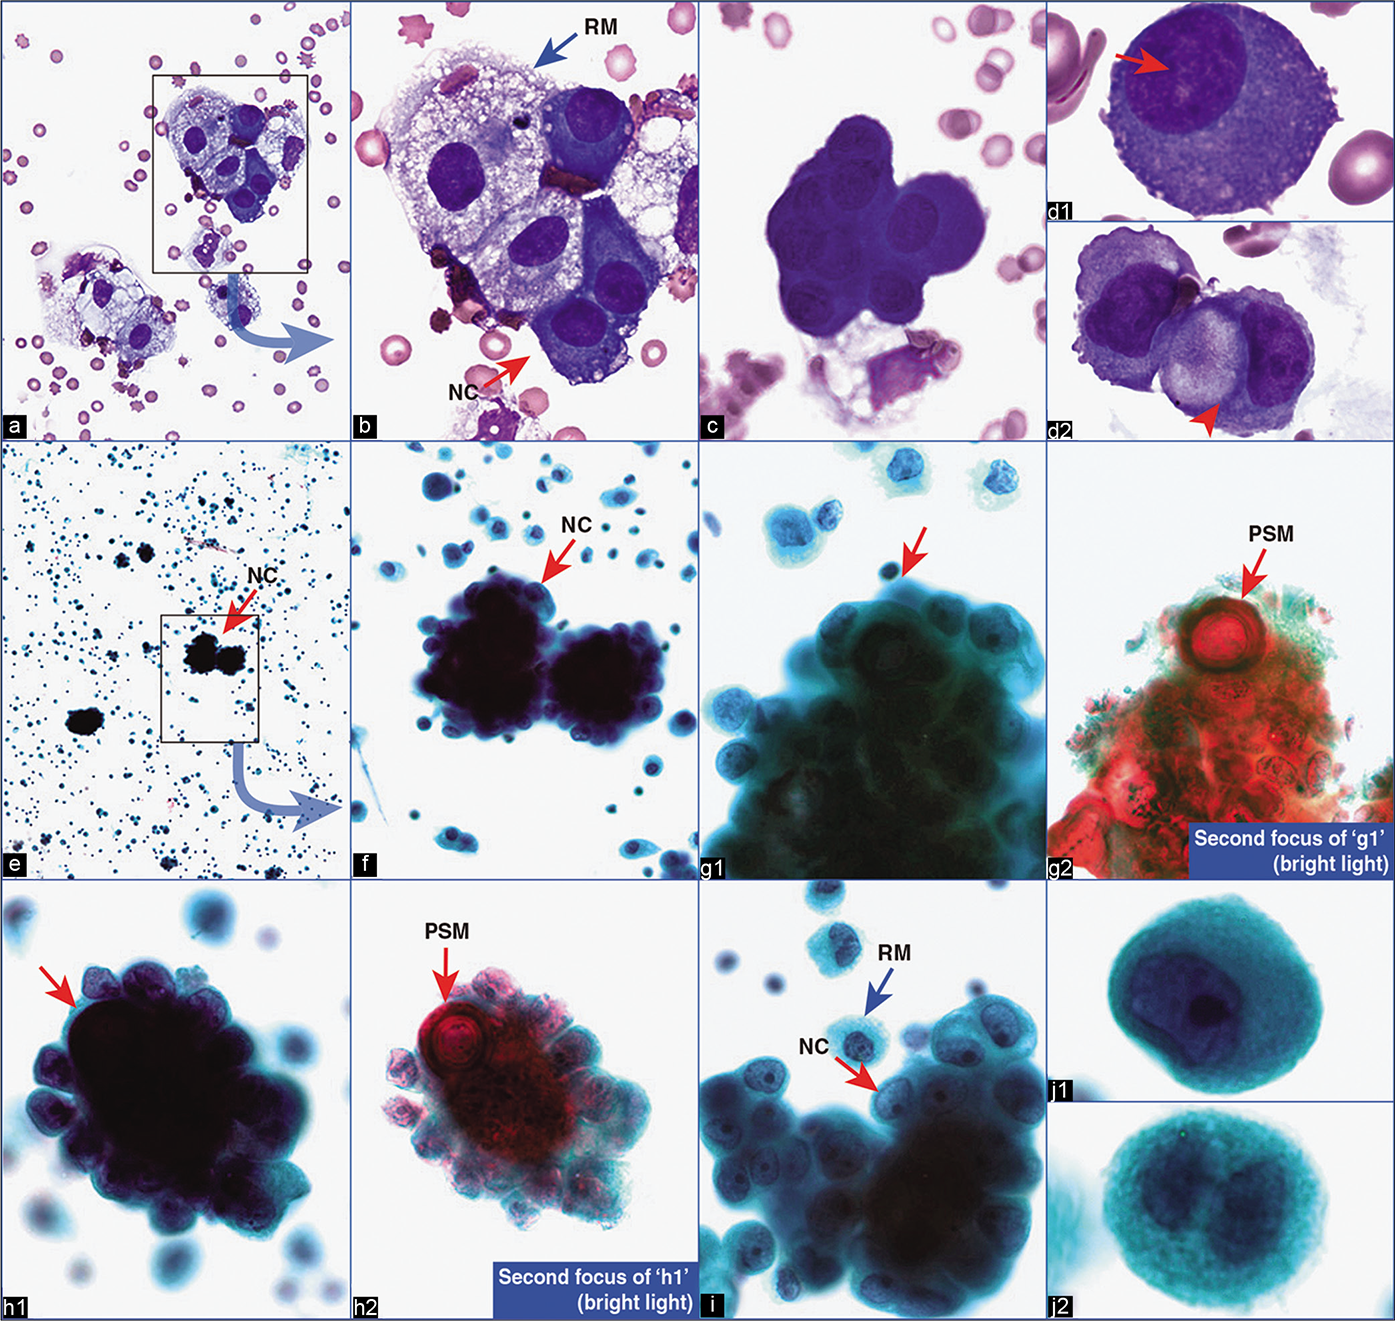 Metastatic papillary carcinoma of thyroid, pleural fluid. ‘Second population’ of cohesive papillary groups (red arrows NC in b,e,f) of cells associated with psammoma bodies with concentric lamination (red arrow PSM in g2,h2) are seen amongst a few reactive mesothelial cells (blue arrow RM in b,i). d1, single tumor cells with eccentric nuclei touching the periphery (red arrow) in DQ-stained preparation. d2, single cells may have cytoplasmic vacuoles with colloid (arrowhead) in DQ-stained preparation. j1, single tumor cells with eccentric nuclei in PAP-stained preparation. j2, compare with reactive mesothelial cell (binucleate) with central nuclei in PAP-stained preparation. The patient had papillary carcinoma of thyroid. NC, neoplastic cell(s); PSM, psammoma body; RM, reactive mesothelial cell(s). [a–d, DQ-stained Cytospin smear; e–j, PAP-stained SurePath smear. (a, 40X; b,c, 100X; d1,d2, 100X zoomed; e, 10X; f, 40X; g1,g2,h1,h2,i, 100X; j1,j2, 100X zoomed).]